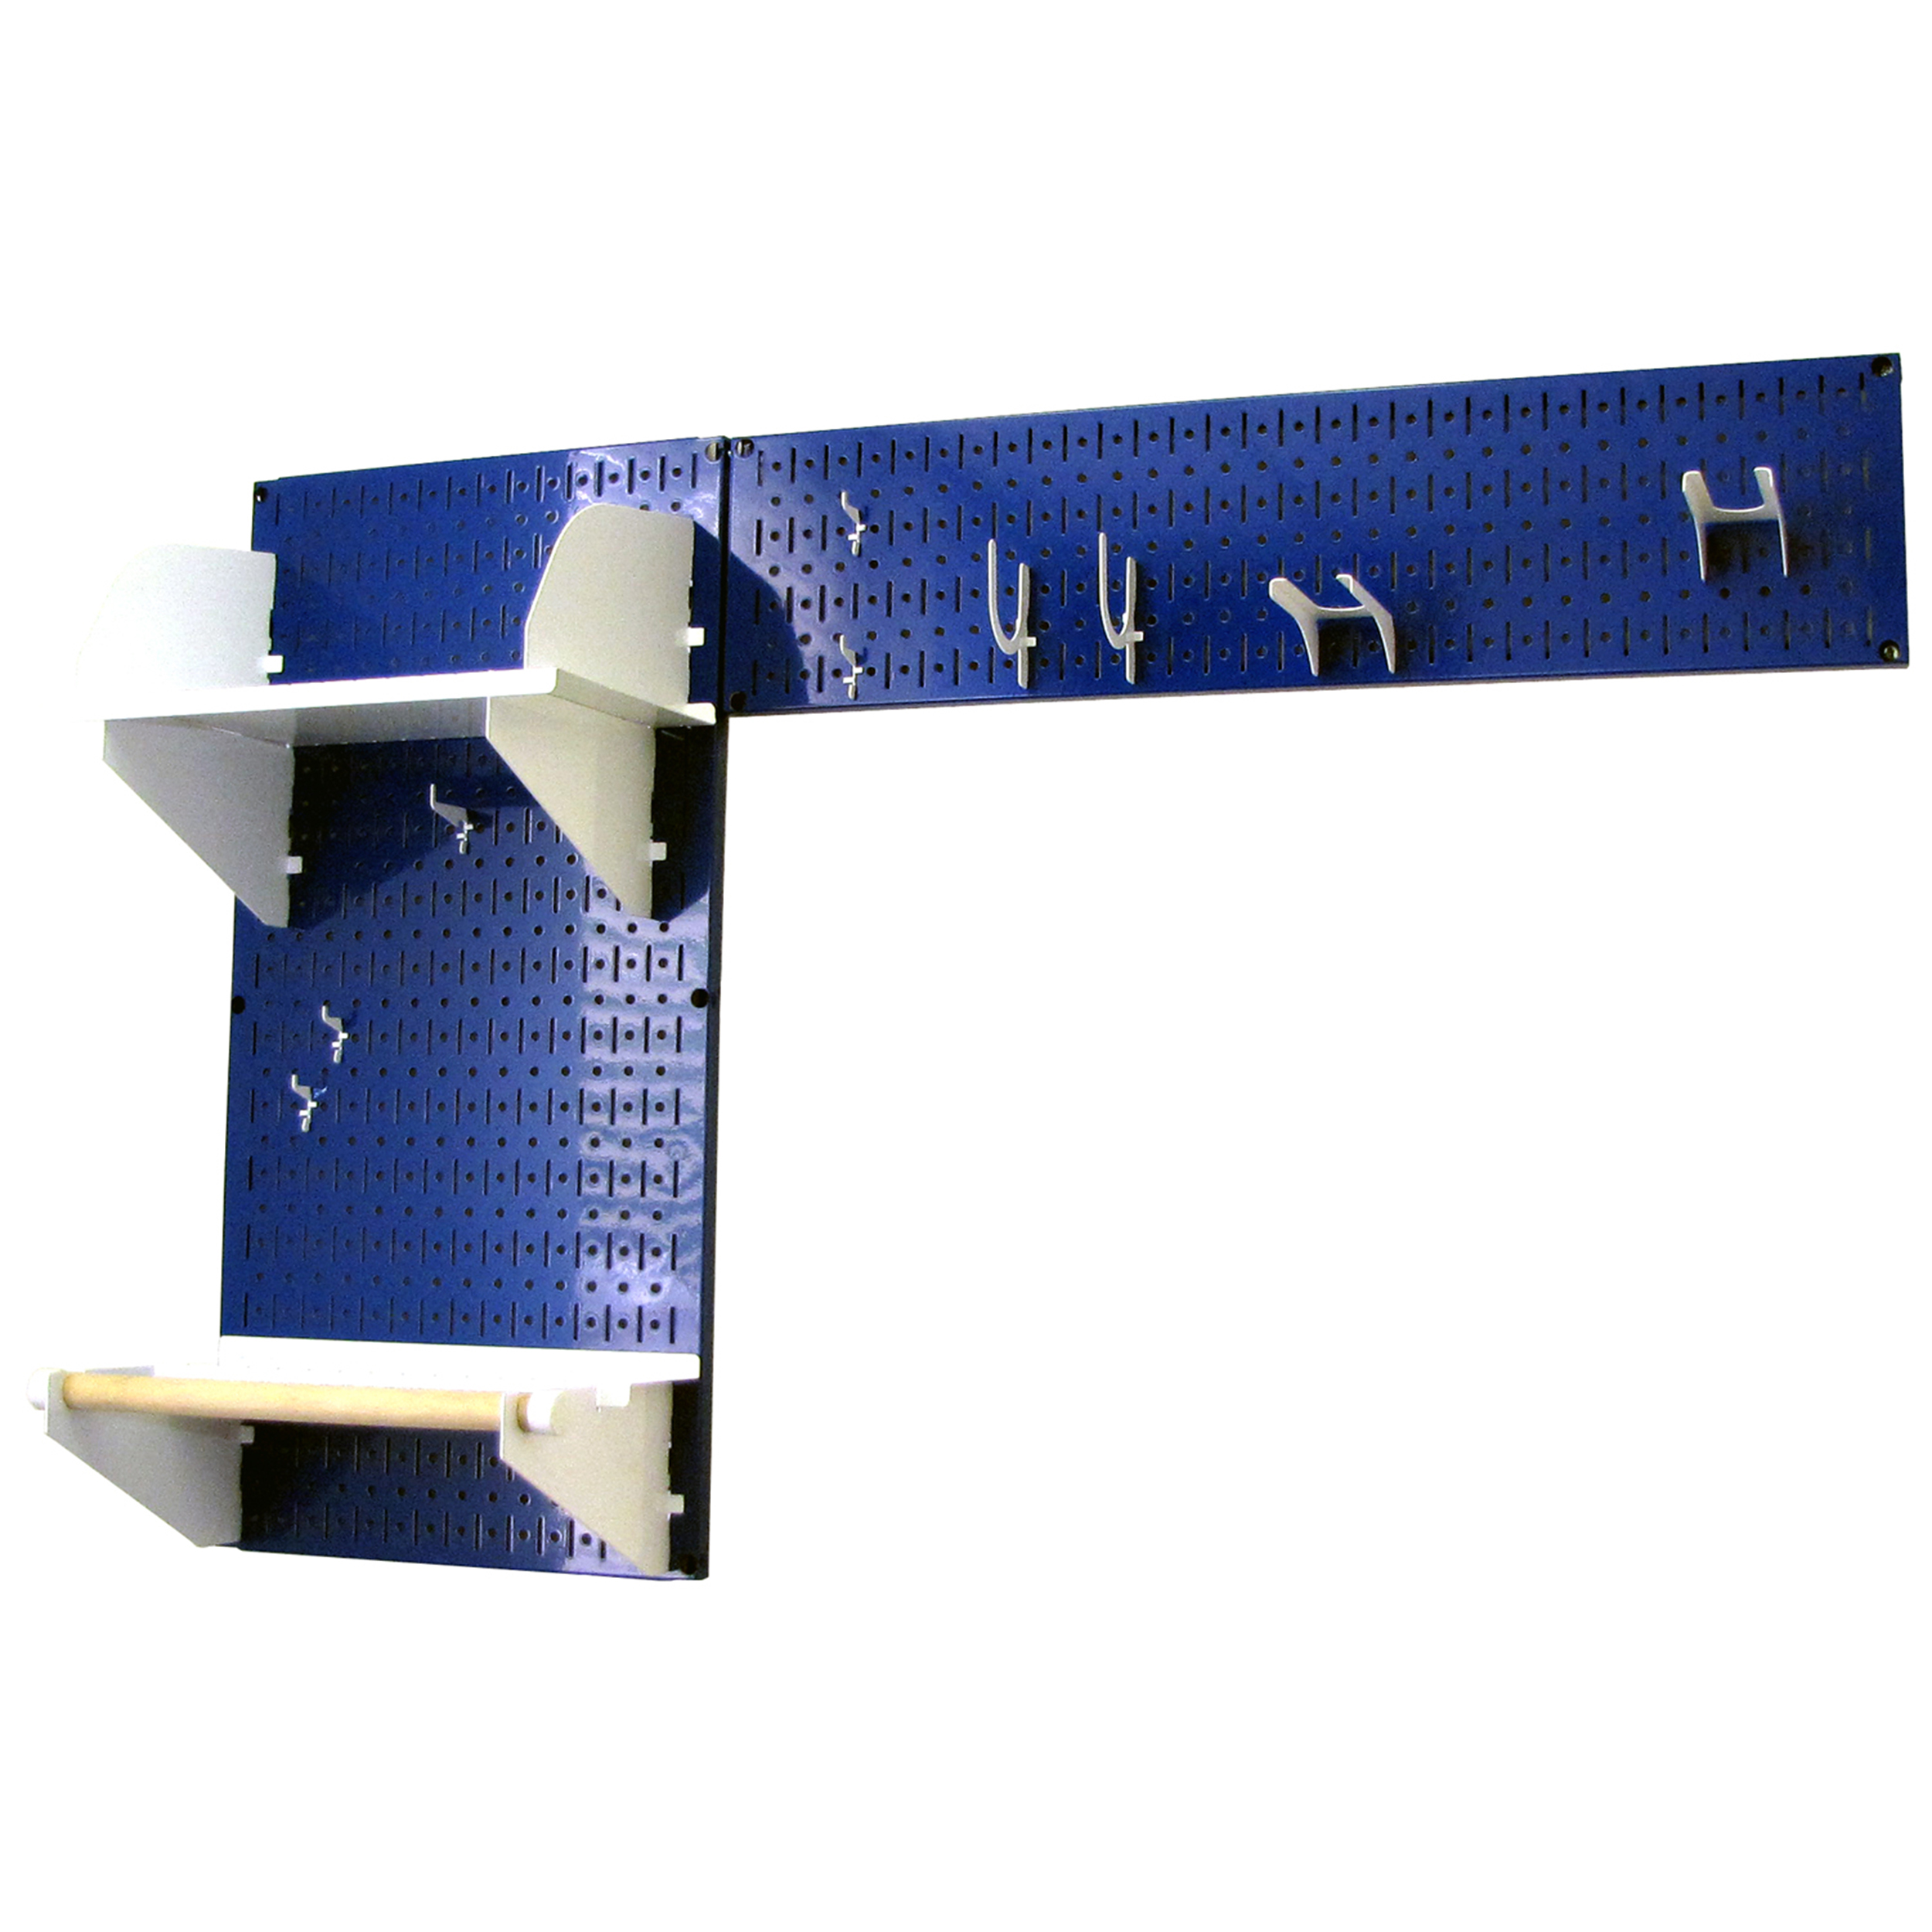 Pegboard Garden Tool Board Organizer With Blue Pegboard And White Accessories